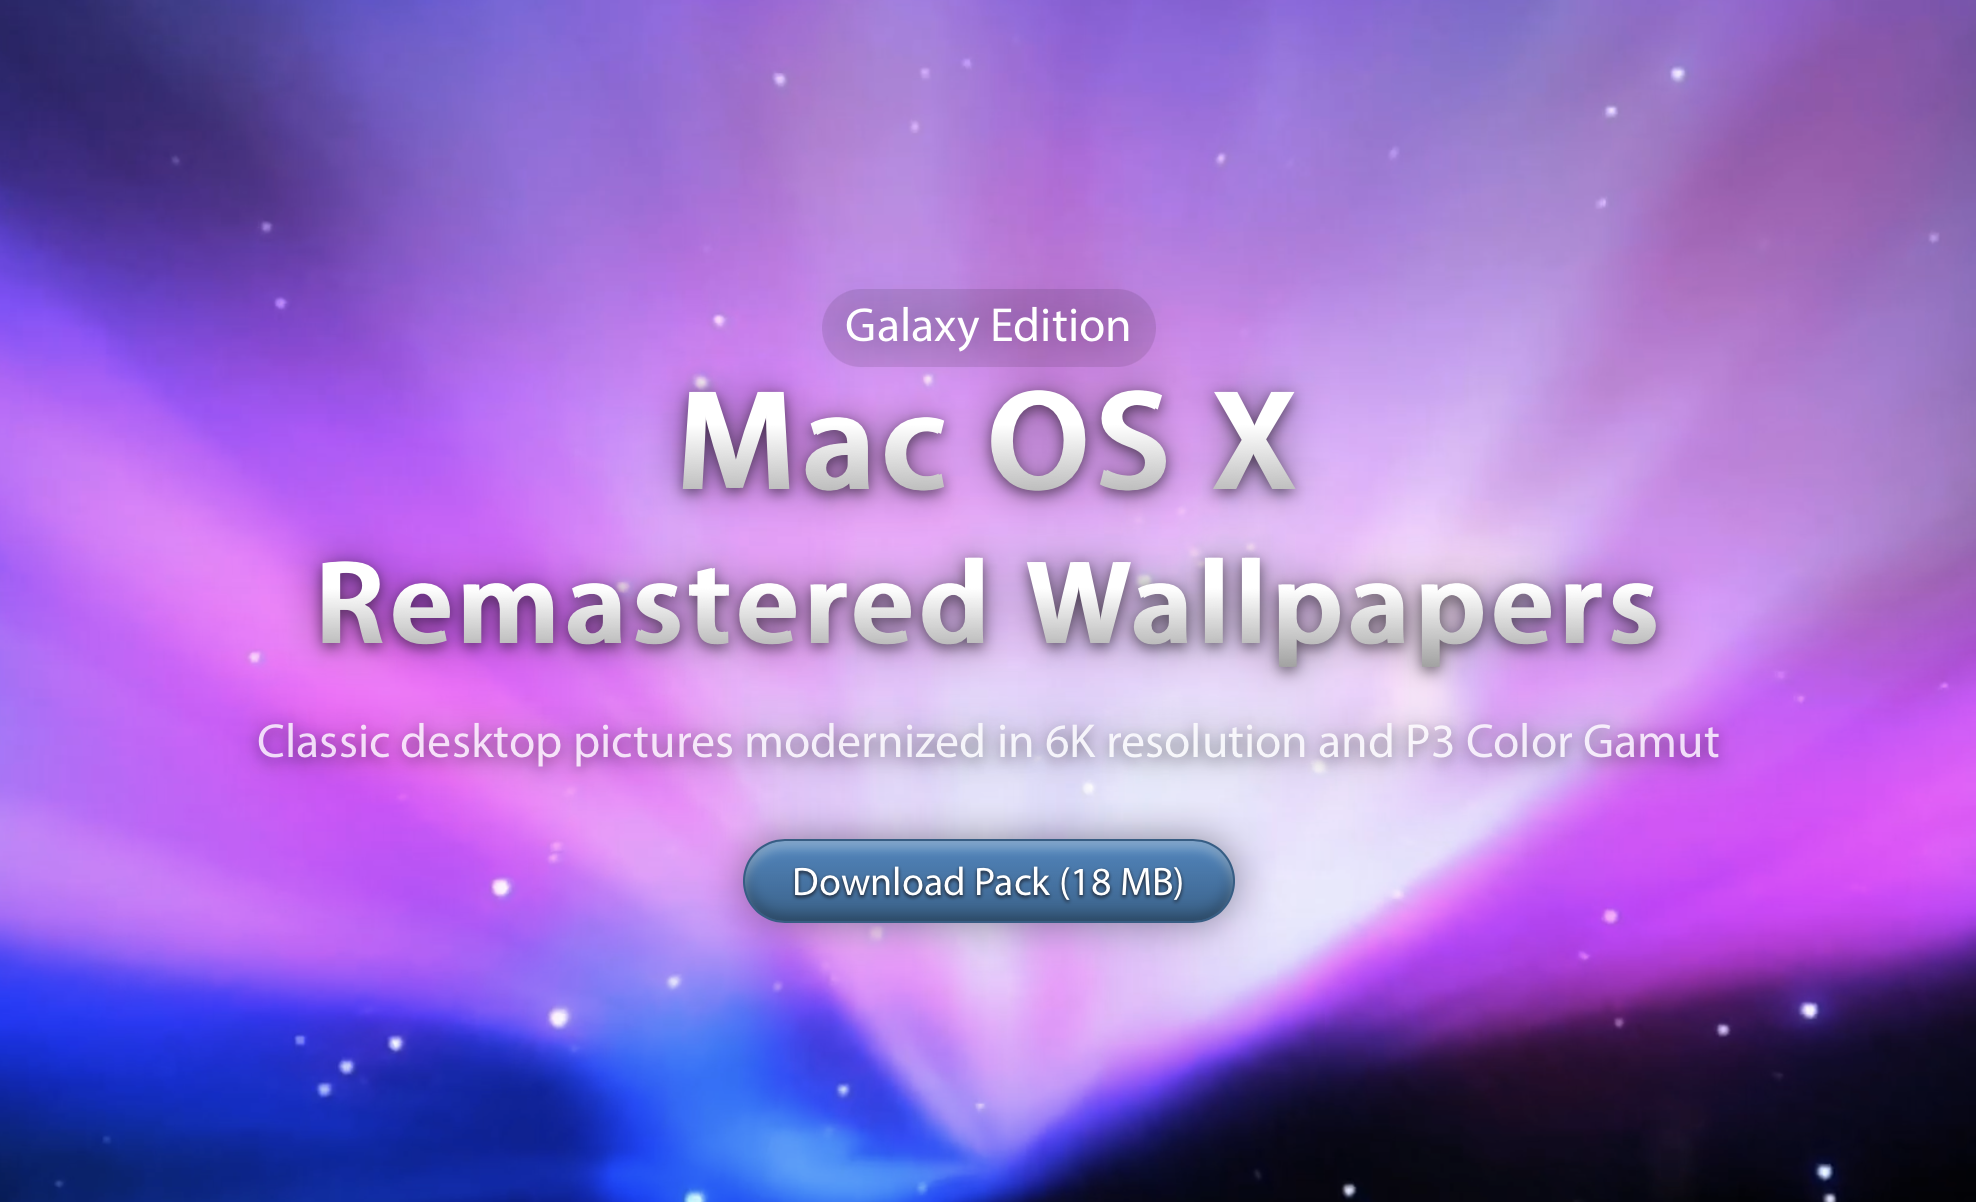 Designer remasters Mac OS X wallpapers in 6K and P3 color space